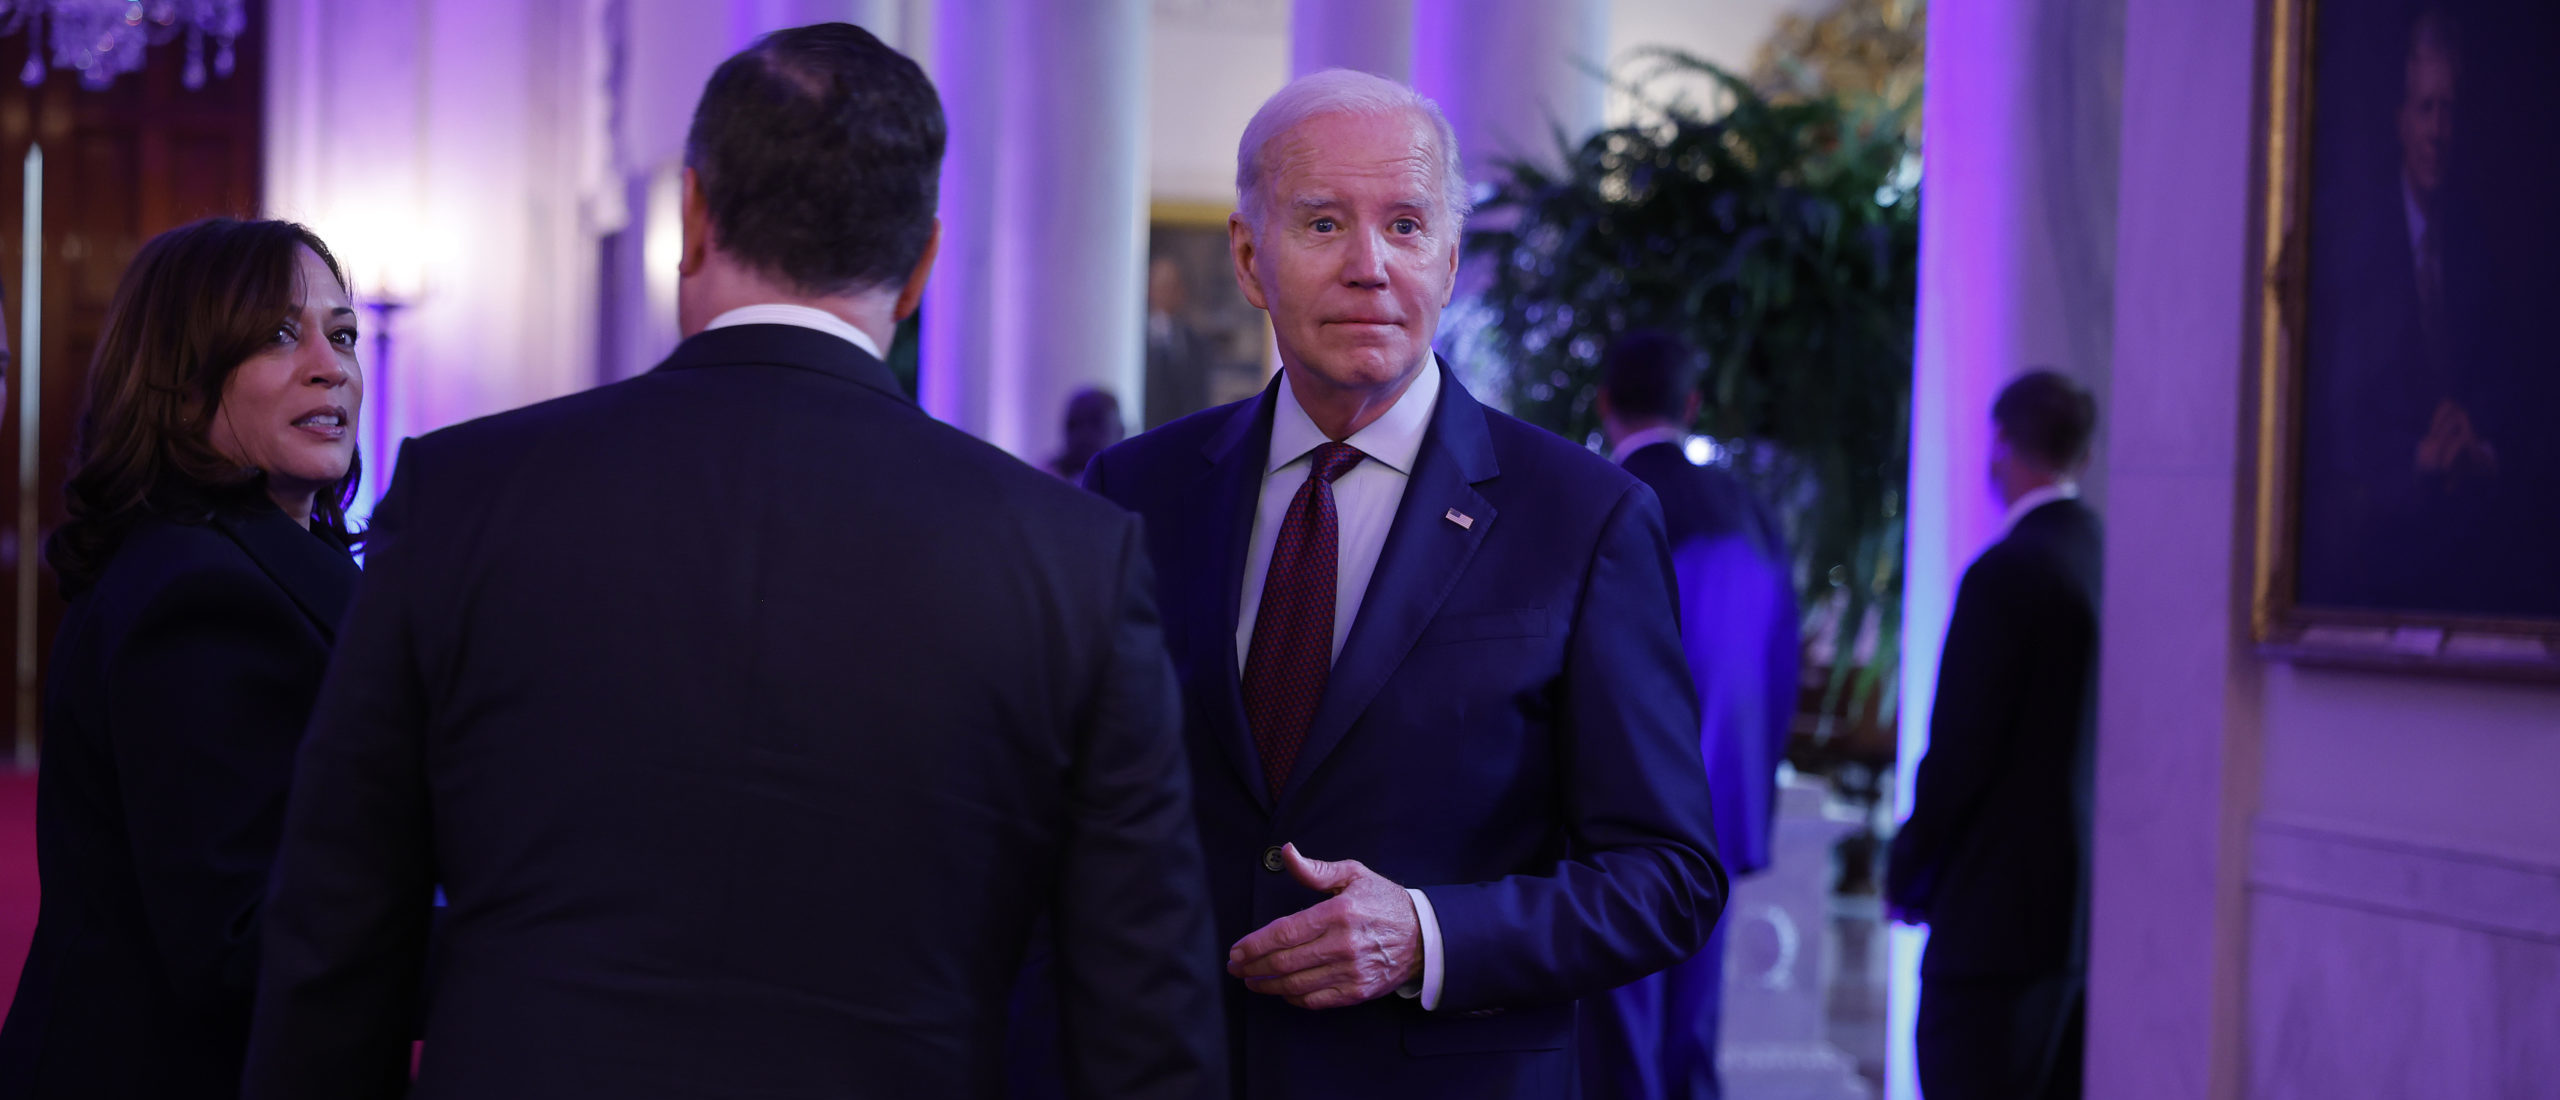 WASHINGTON, DC - MAY 16: U.S. President Joe Biden, Vice President Kamala Harris (L) and second gentleman Doug Emhoff depart a celebration to mark Jewish American Heritage Month in the East Room of the White House on May 16, 2023 in Washington, DC. Tony Award nominees Ben Platt and Micaela Diamond performed music from "Parade" during the event, which focused on the Biden Administration's efforts to combat rising antisemitism. (Photo by Chip Somodevilla/Getty Images)